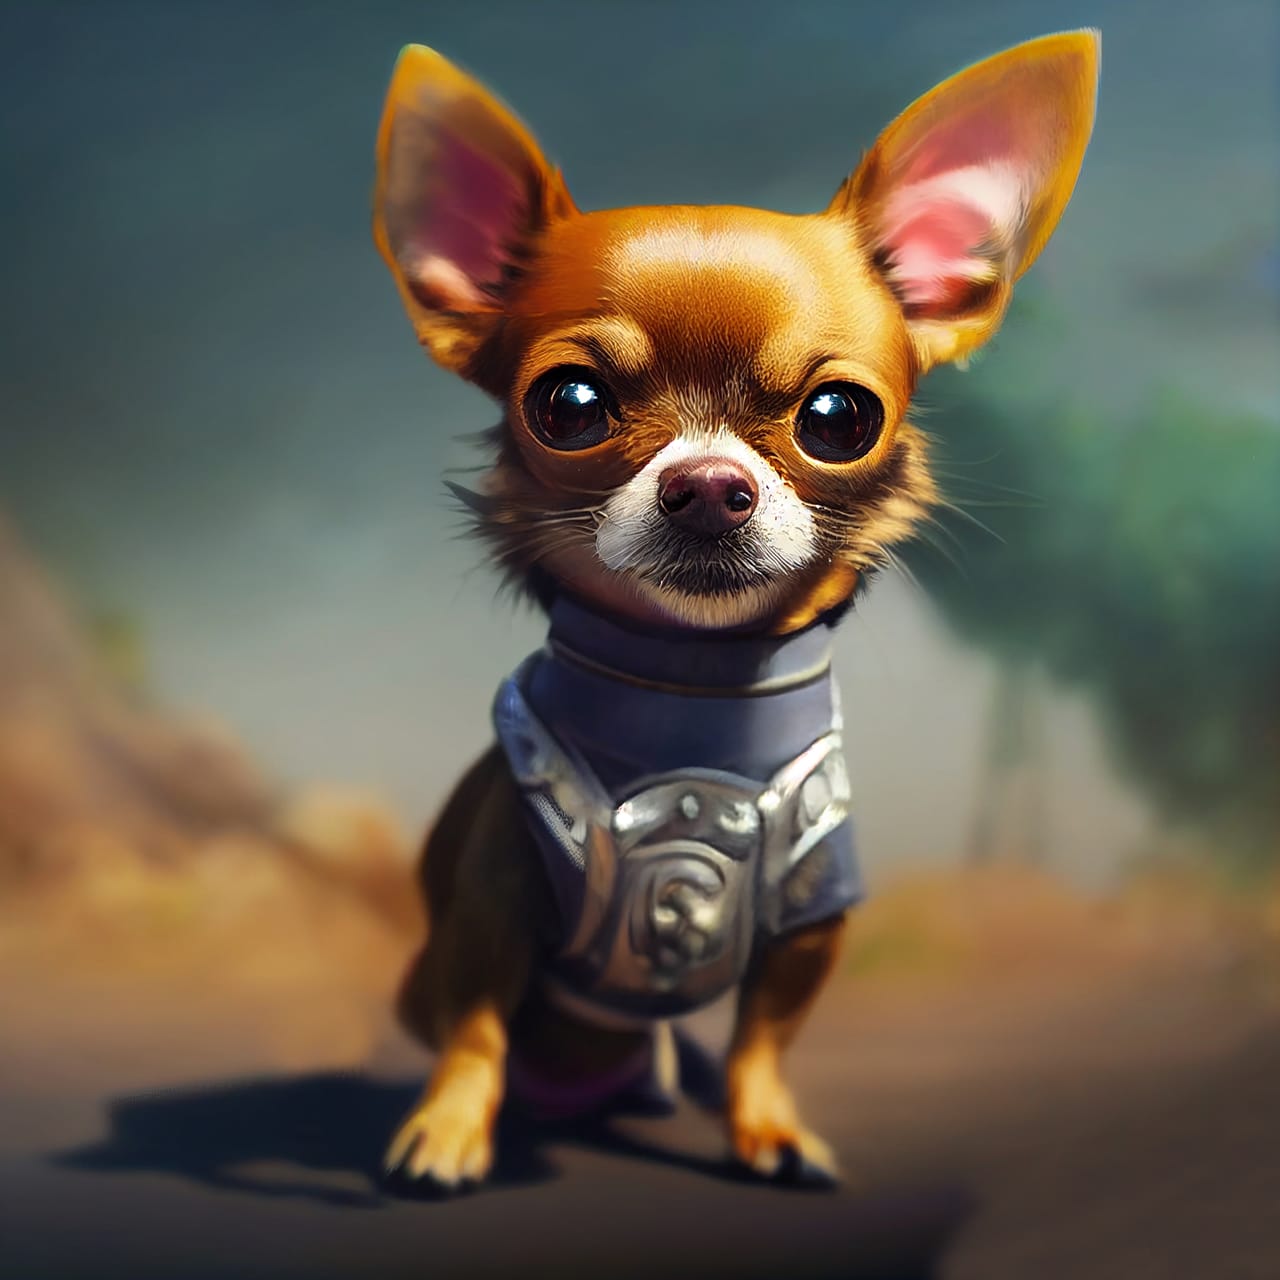 Related image adorable tiny chihuahua puppy as cartoon adventurer